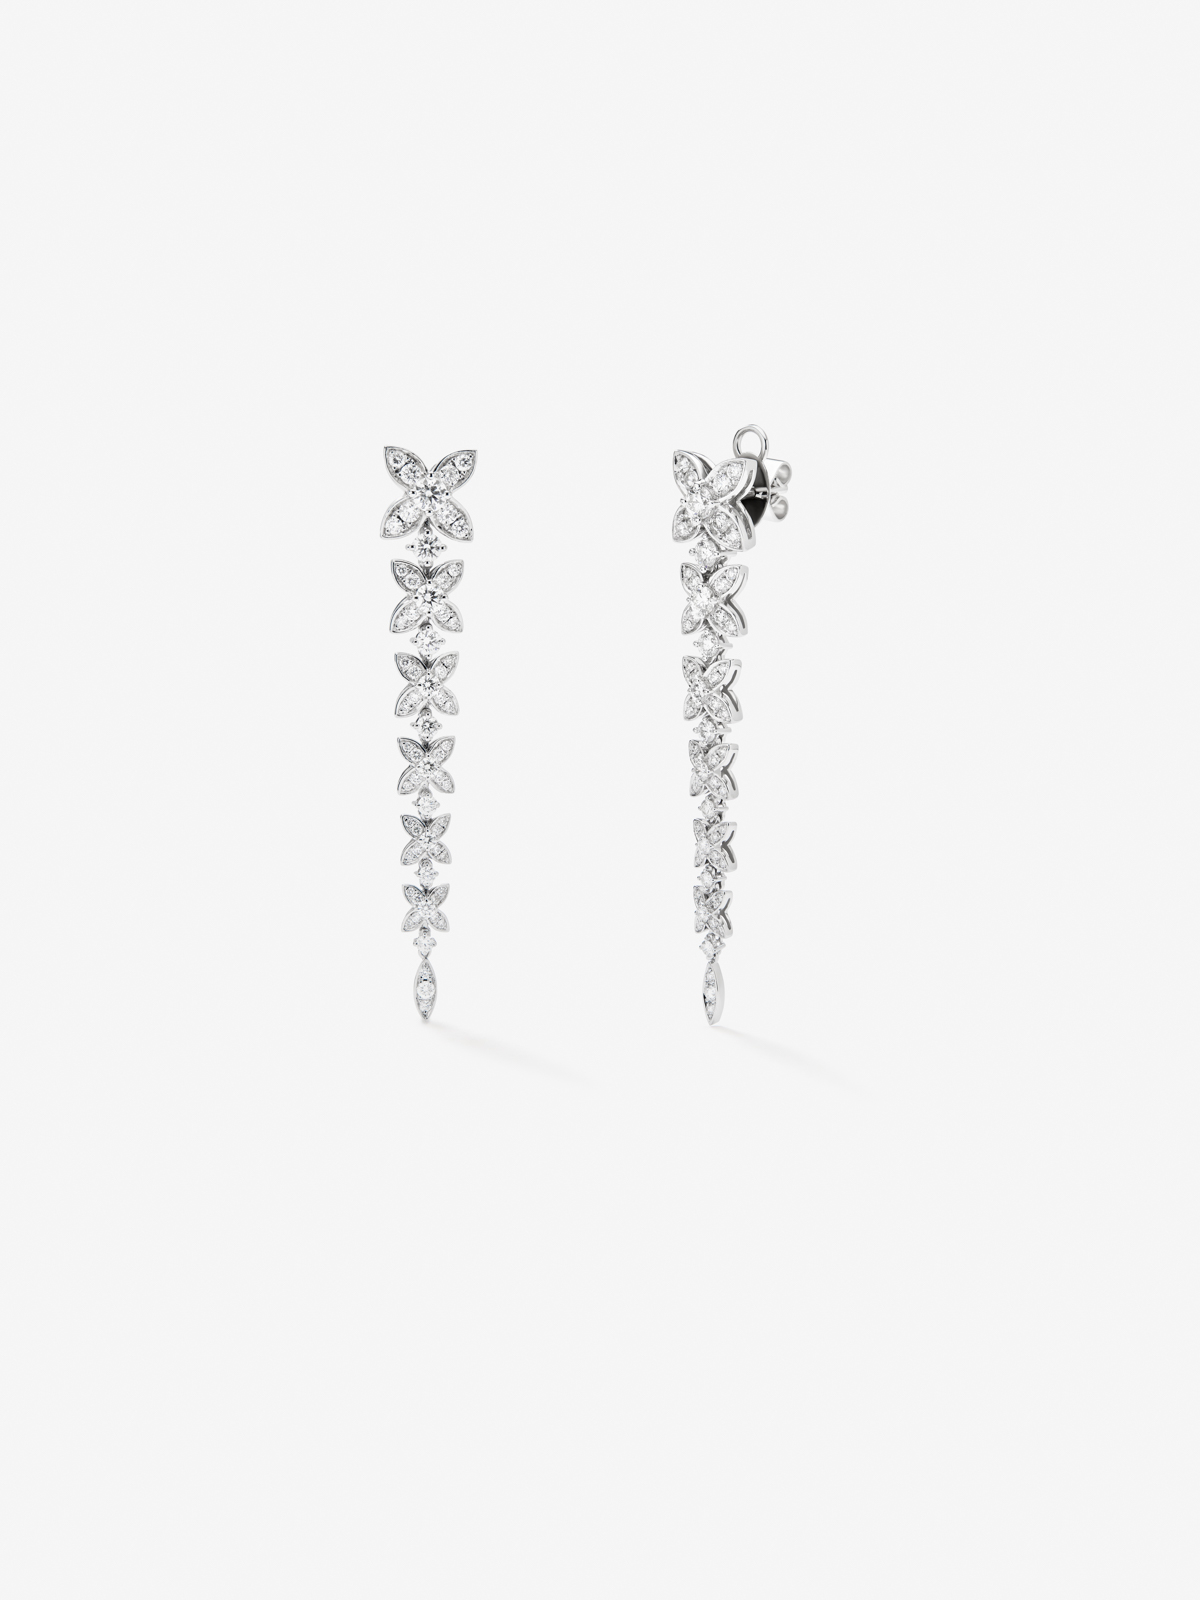 18K white gold earrings with white diamonds in 2.48 cts